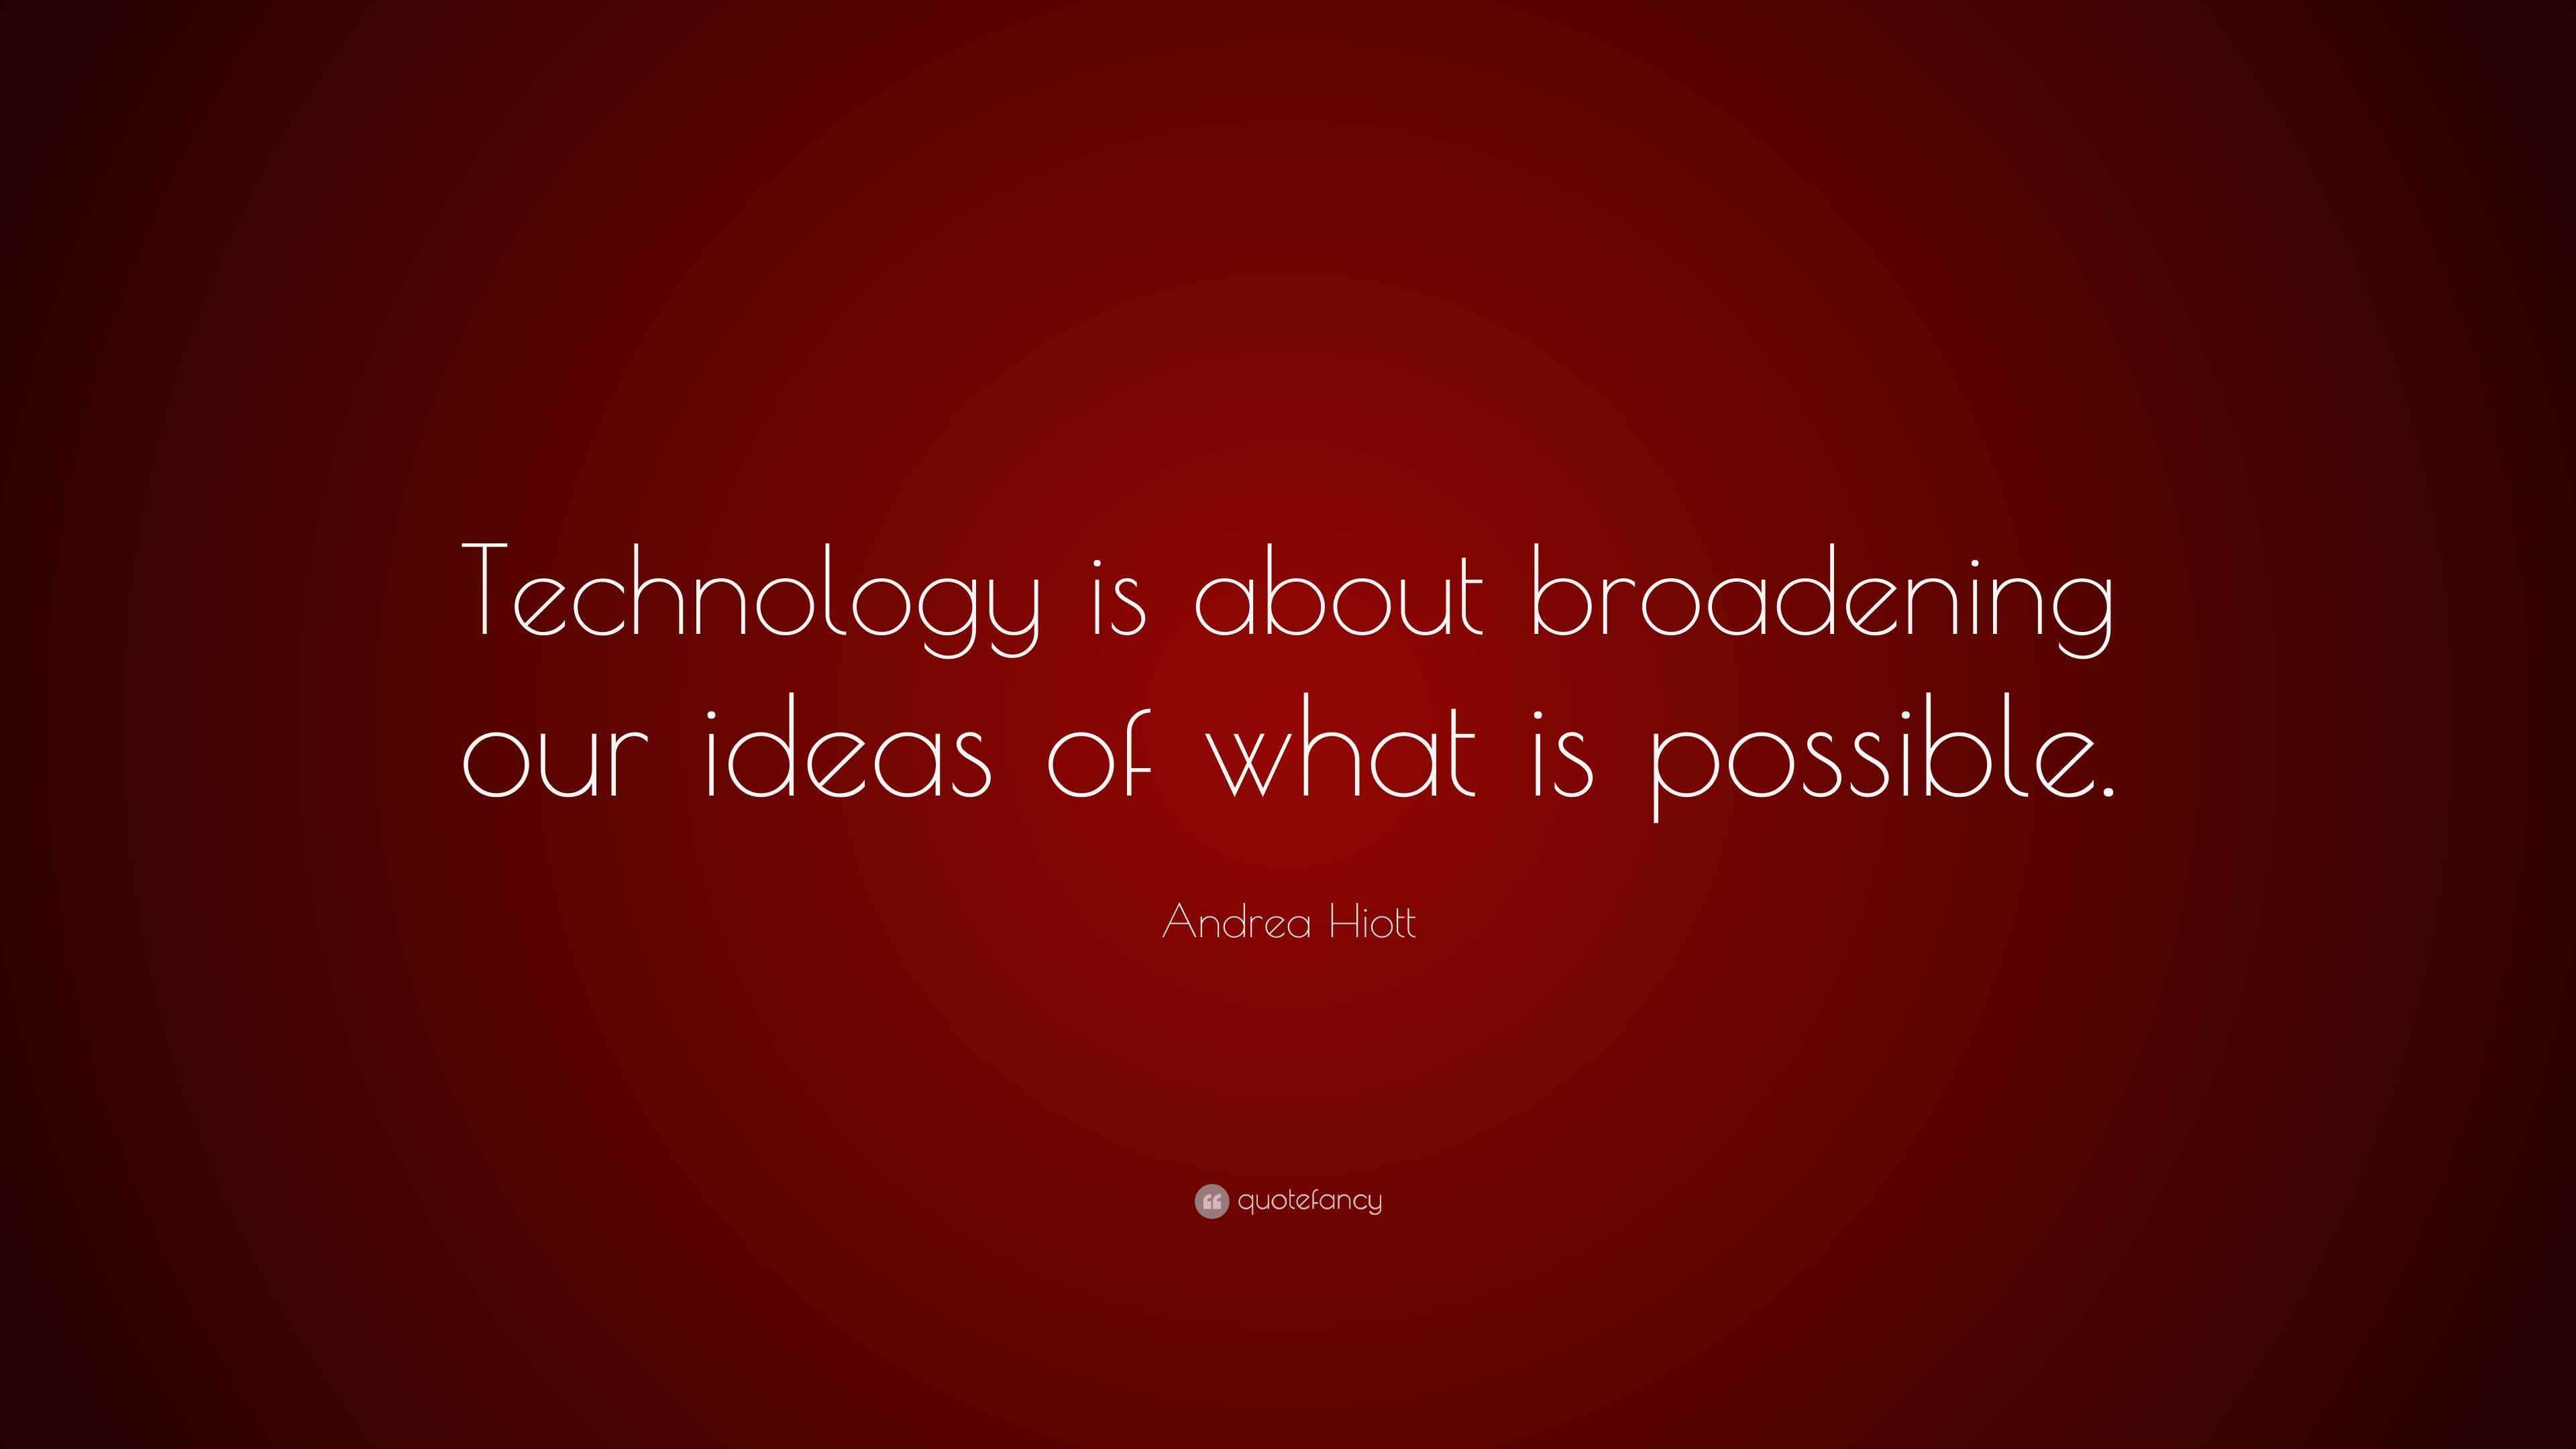 Andrea Hiott Quote: “Technology is about broadening our ideas of what ...